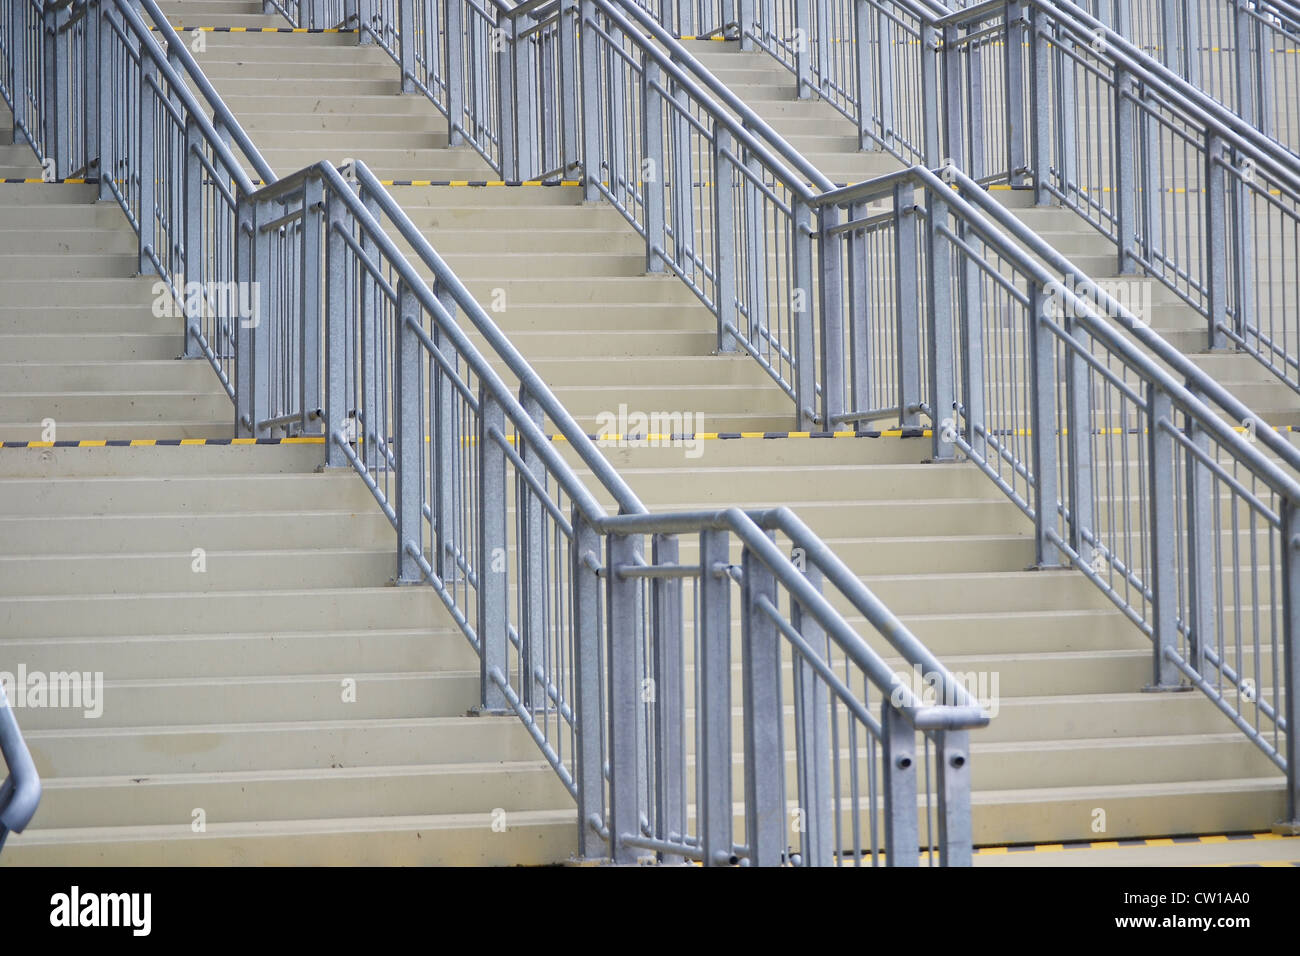 Stairs in public space Stock Photo